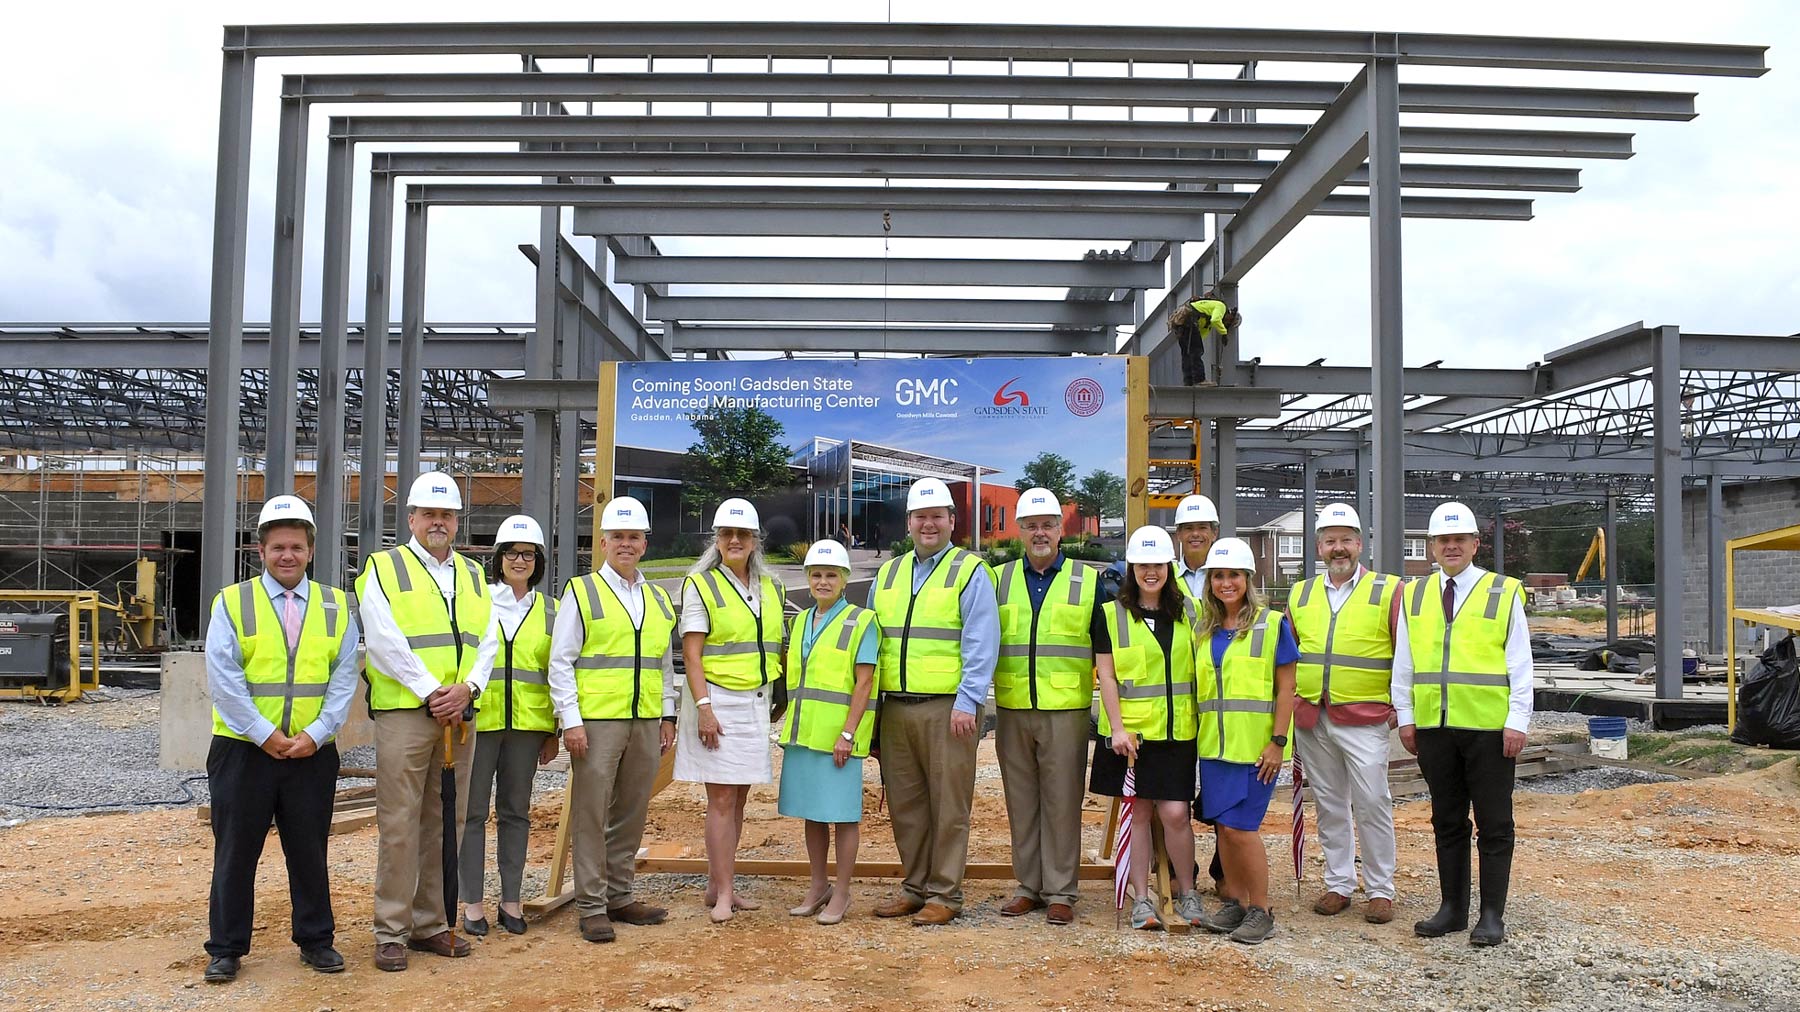 Dr. Murphy, members of the executive cabinet and local dignitaries in front of the worksite for the Advanced Manufacturing Center on the East Broad Campus